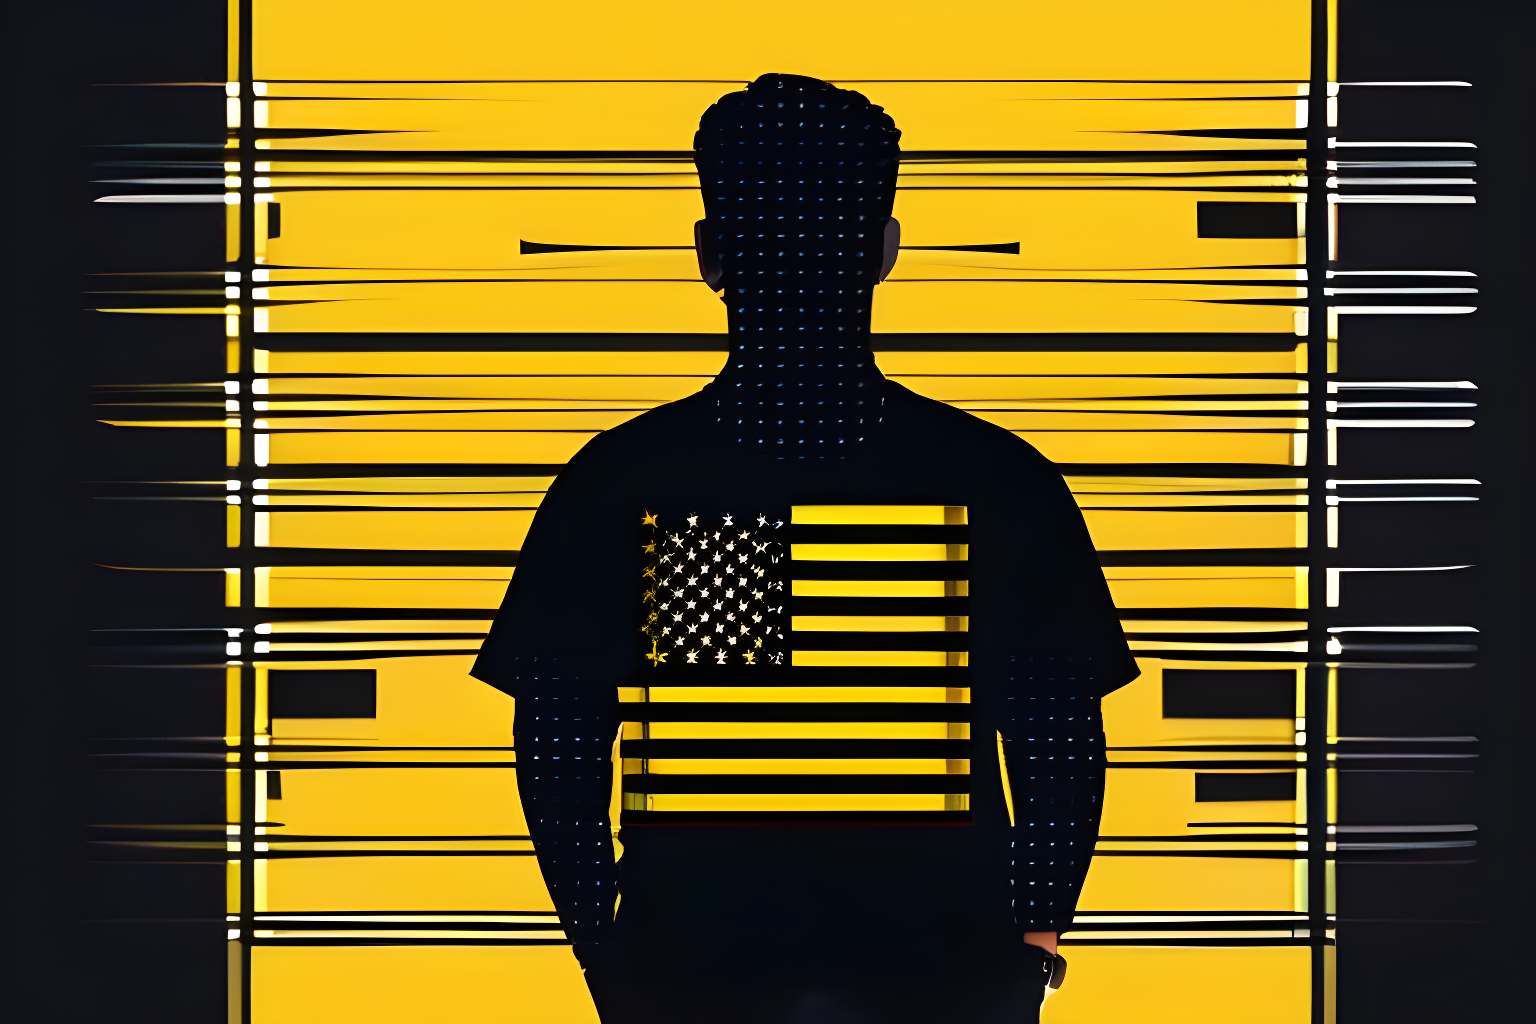 Generate an image where individuals wearing Binance T-shirts are depicted in a custody of US officials.